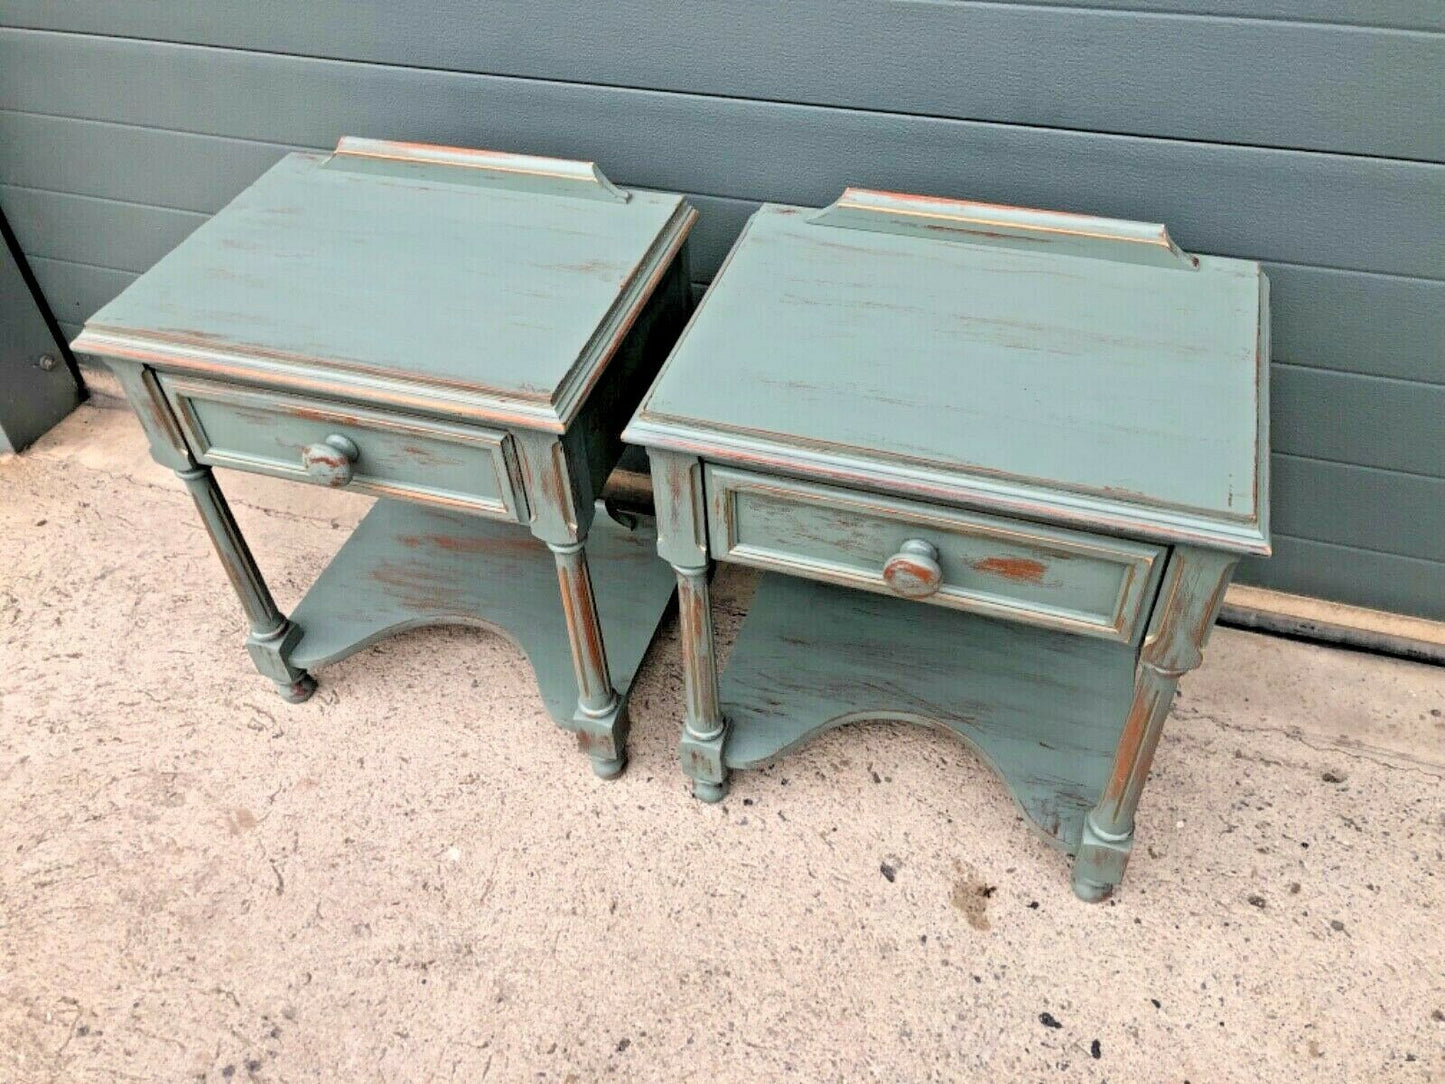 Handsome Pair Of Vintage Empire Style Bedside Tables / Lamp Tables ( SOLD )